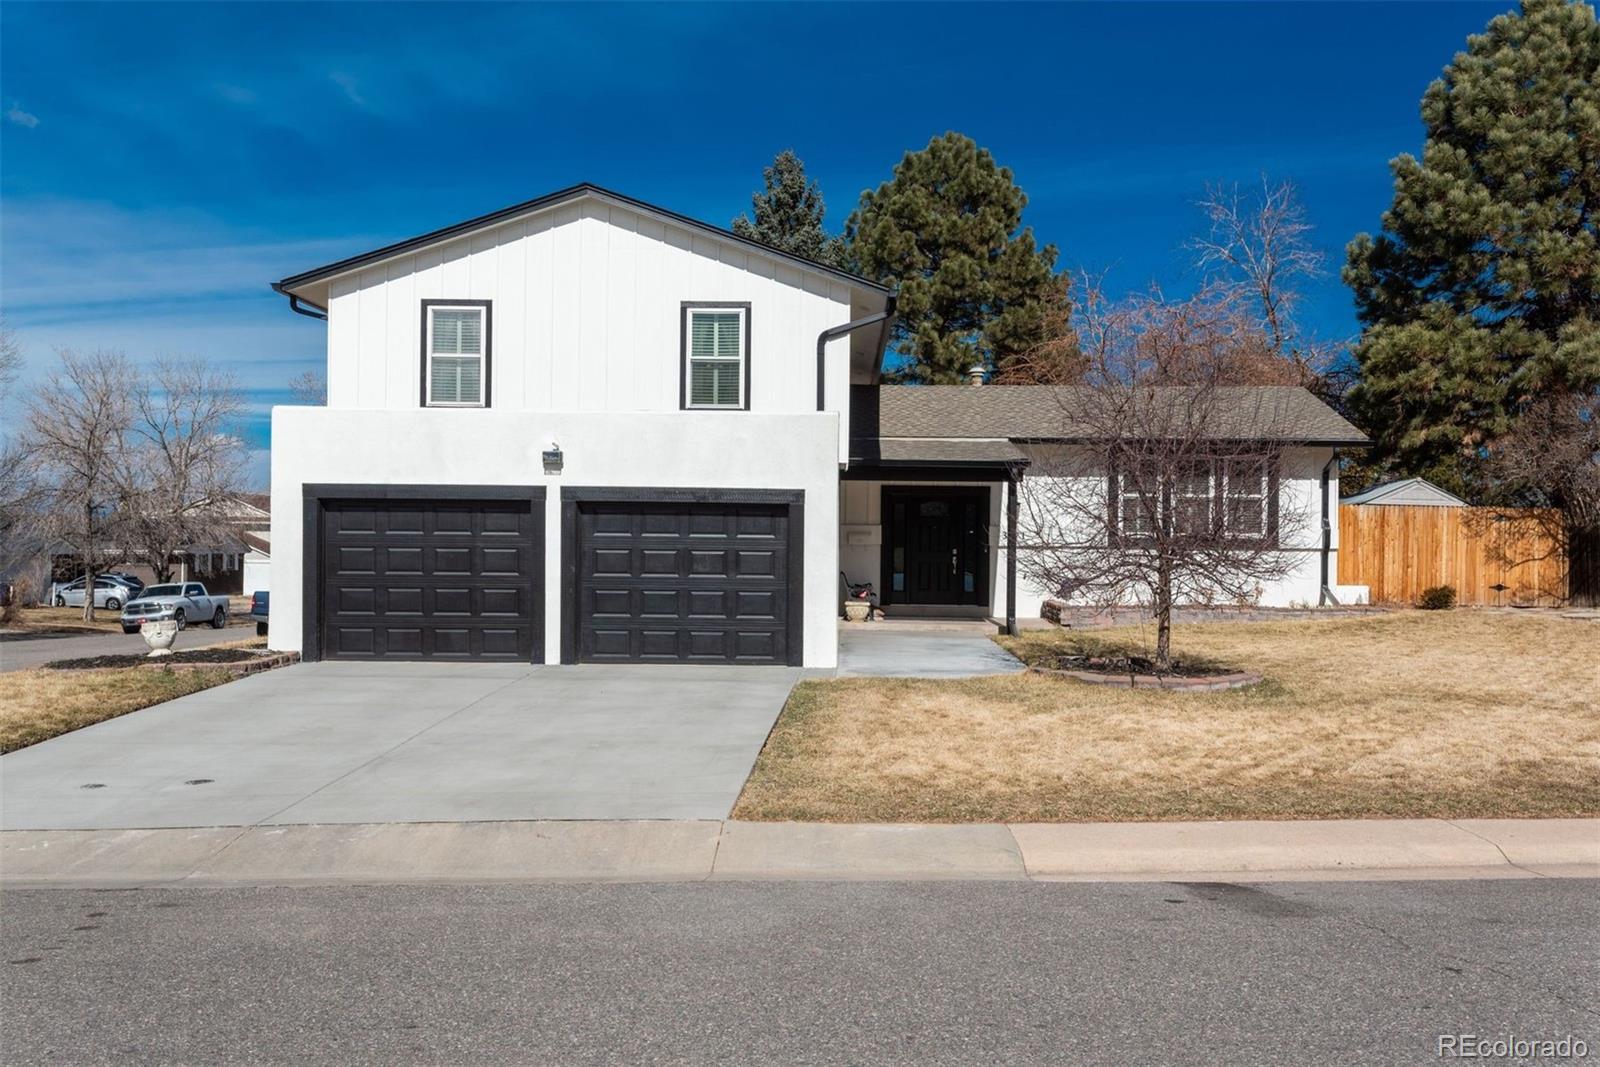 3171 s jasmine way, Denver sold home. Closed on 2024-04-03 for $760,000.